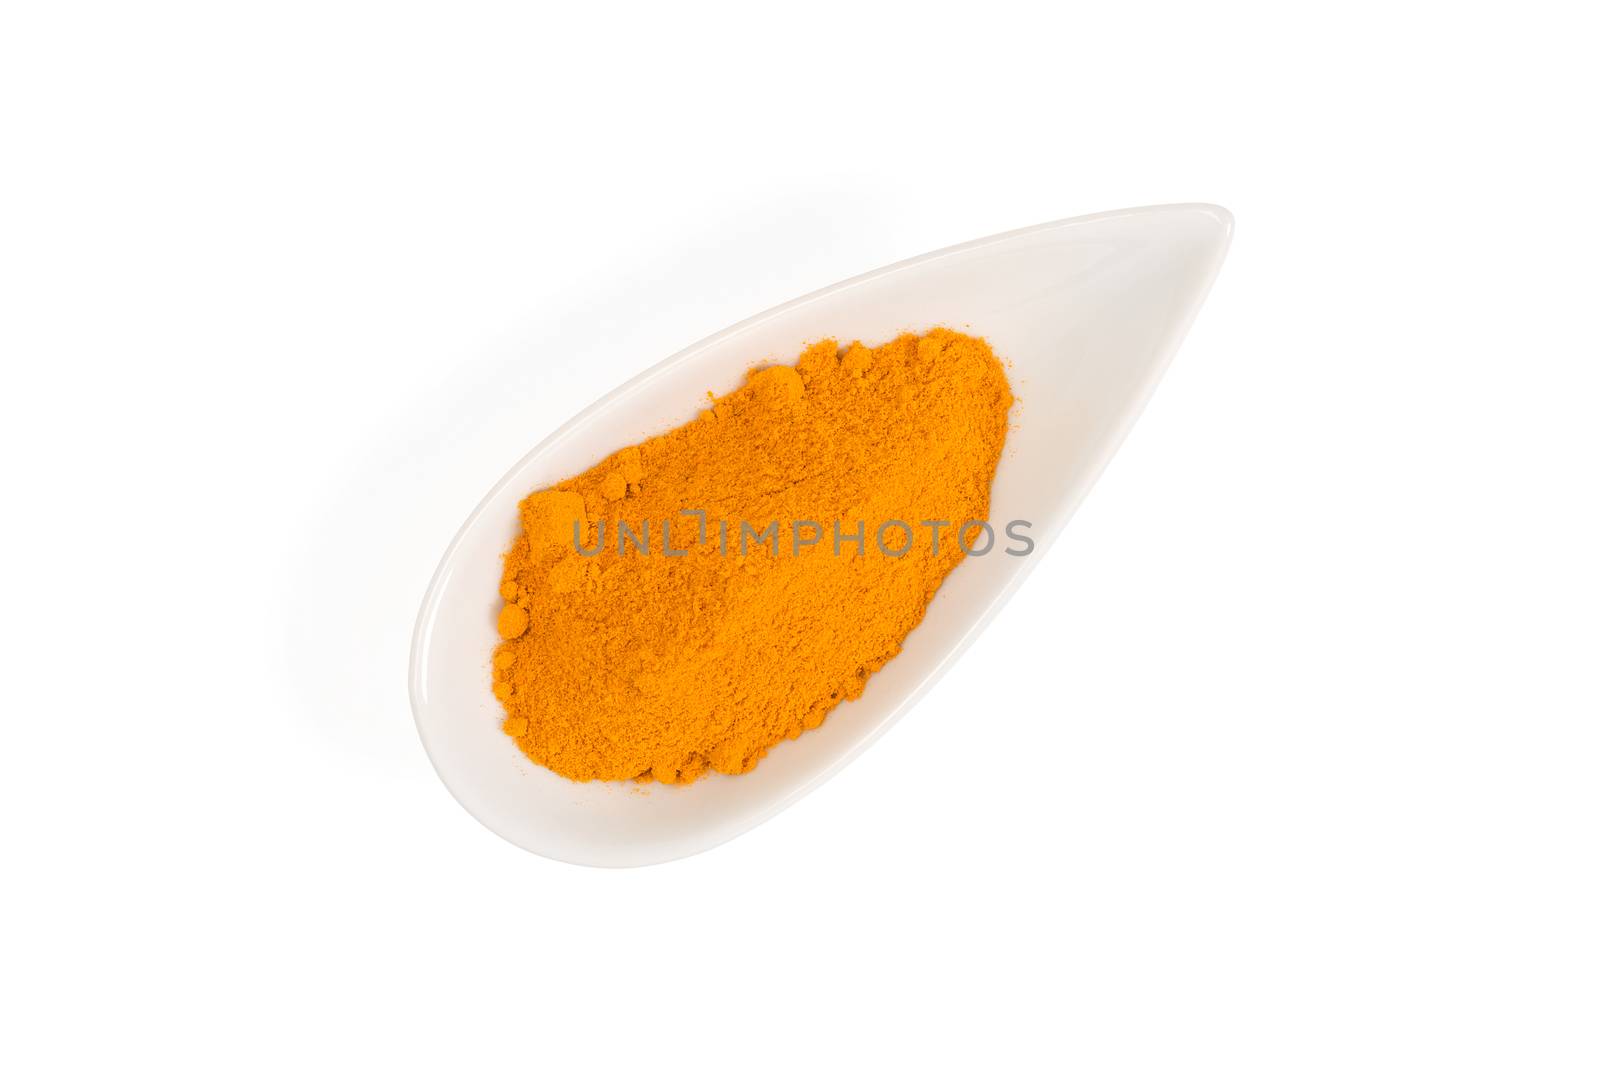 turmeric in white bowl isolated over white background